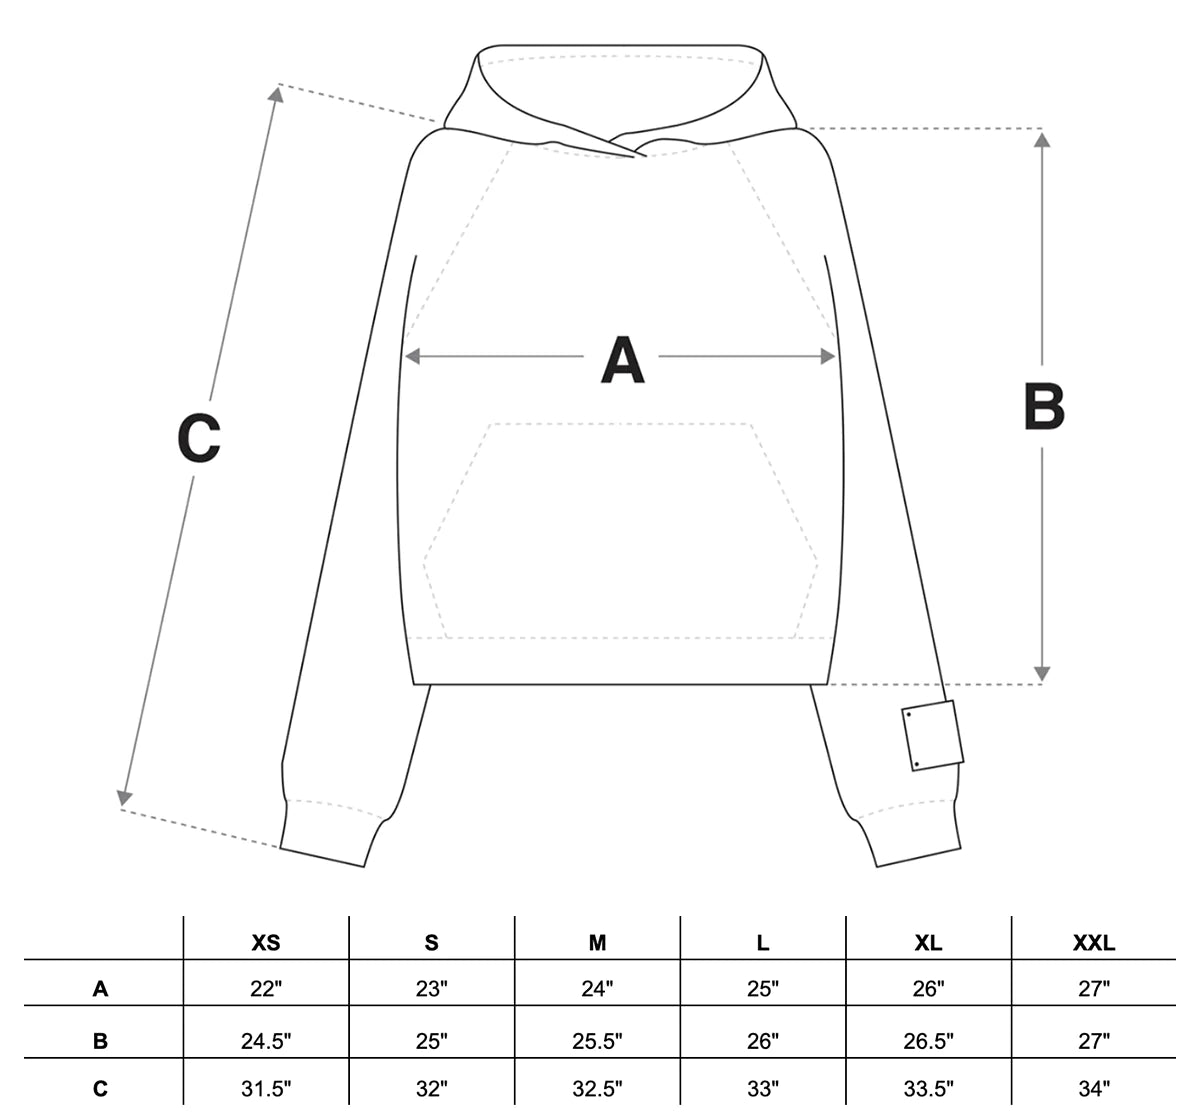 Field Research Division Hooded Sweatshirt in Yellow Size Guide